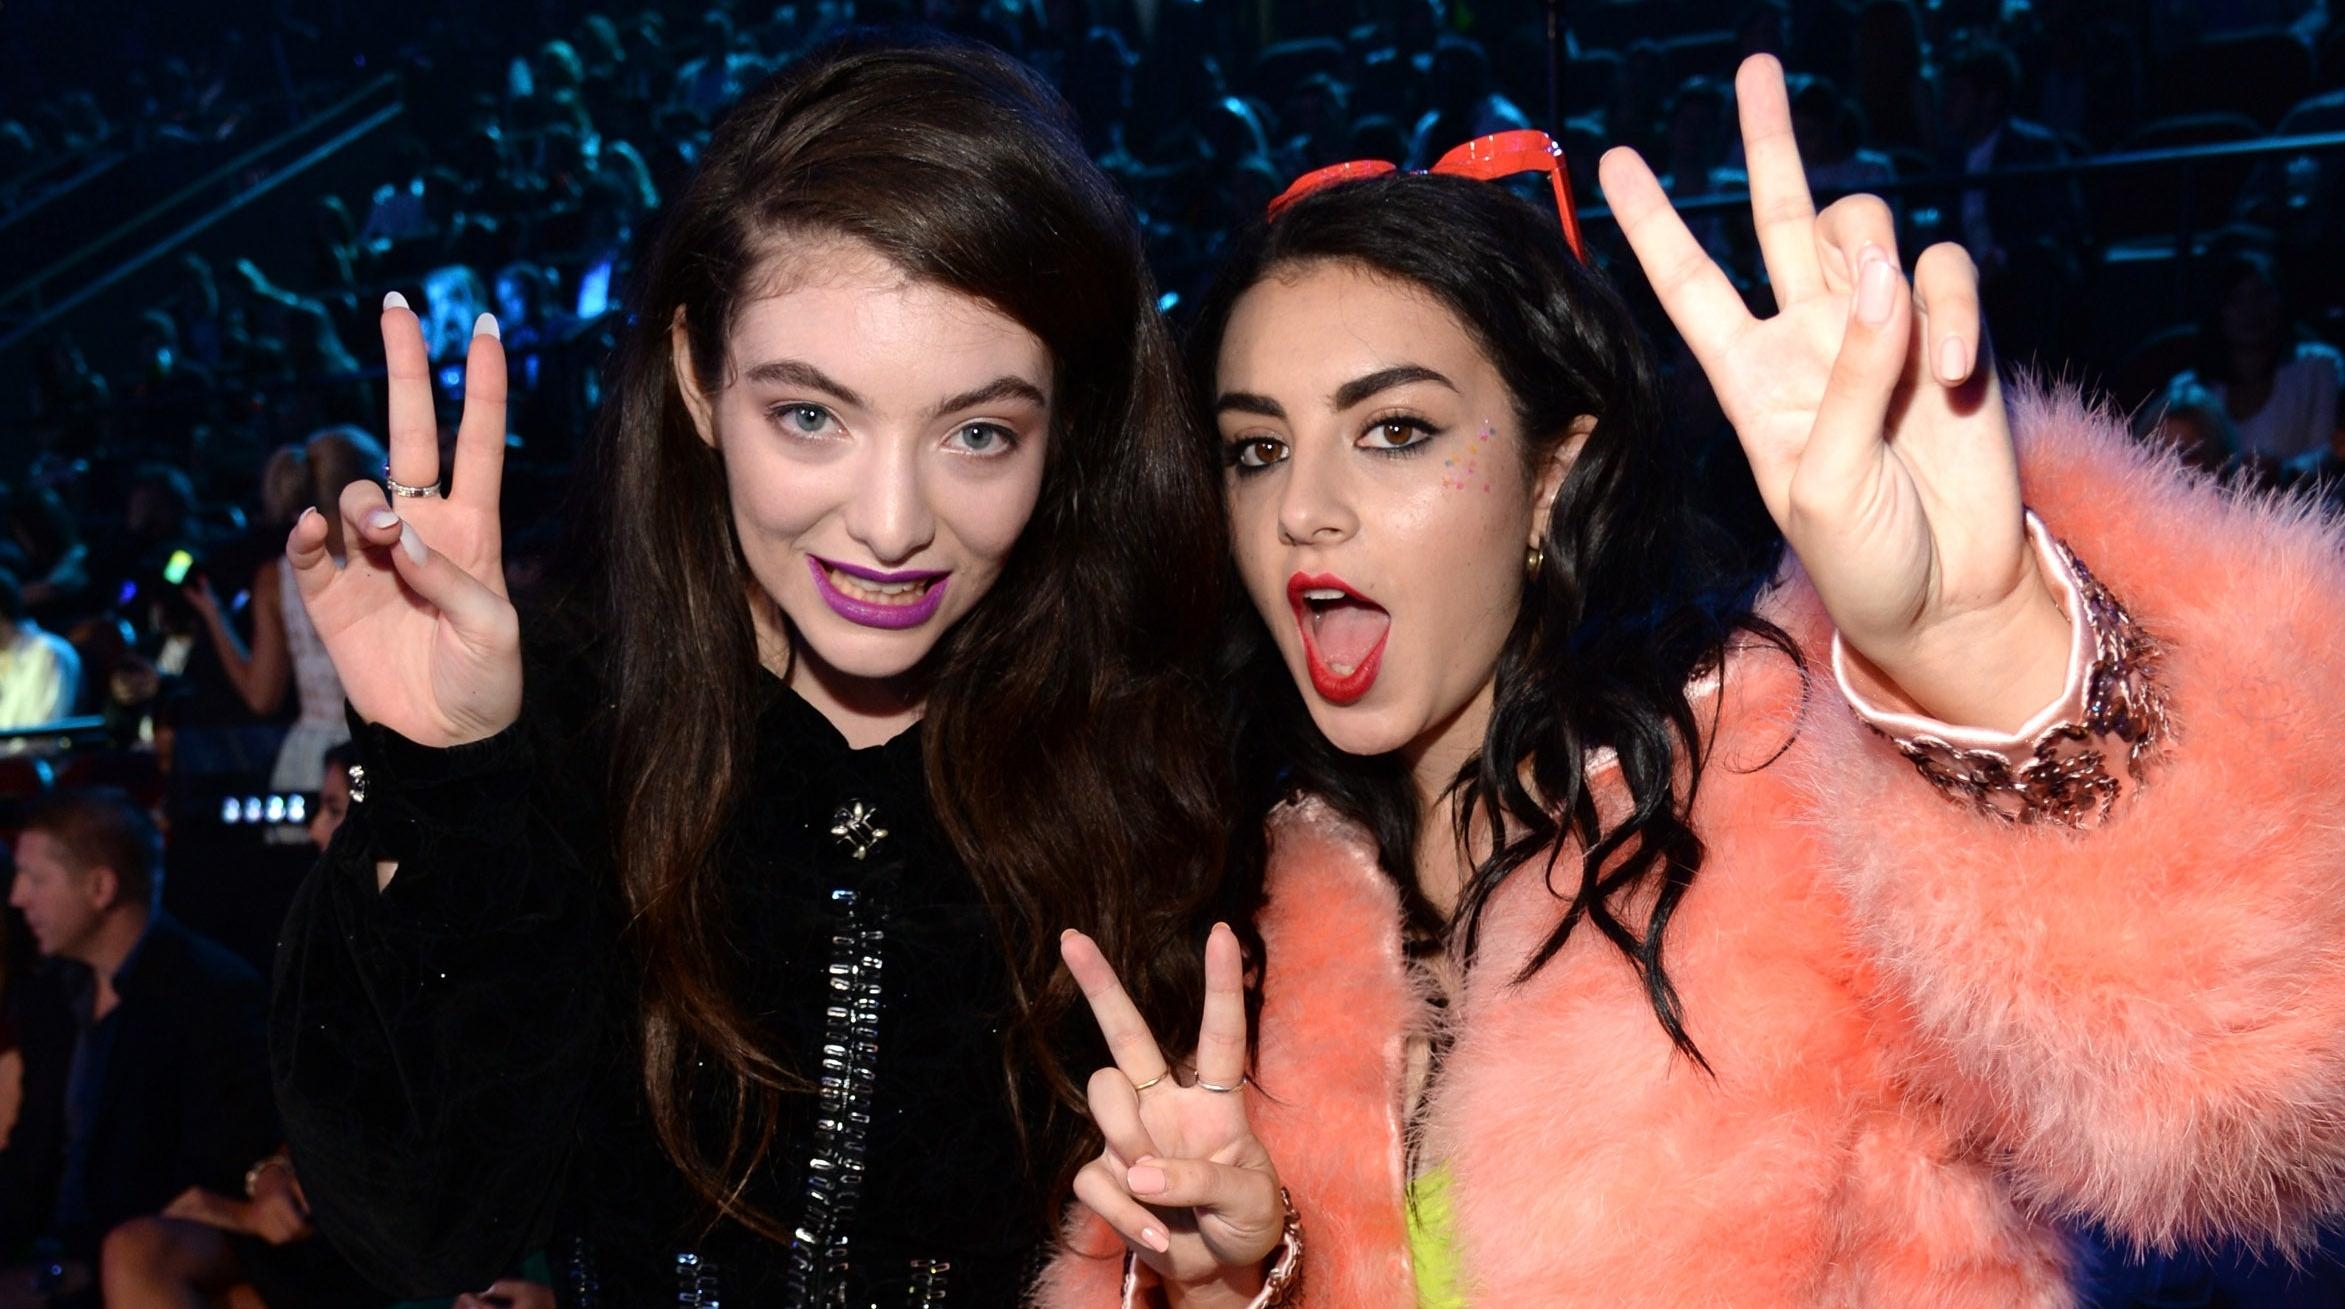 Charli xcx recruits Lorde for the remix of her song about Lorde